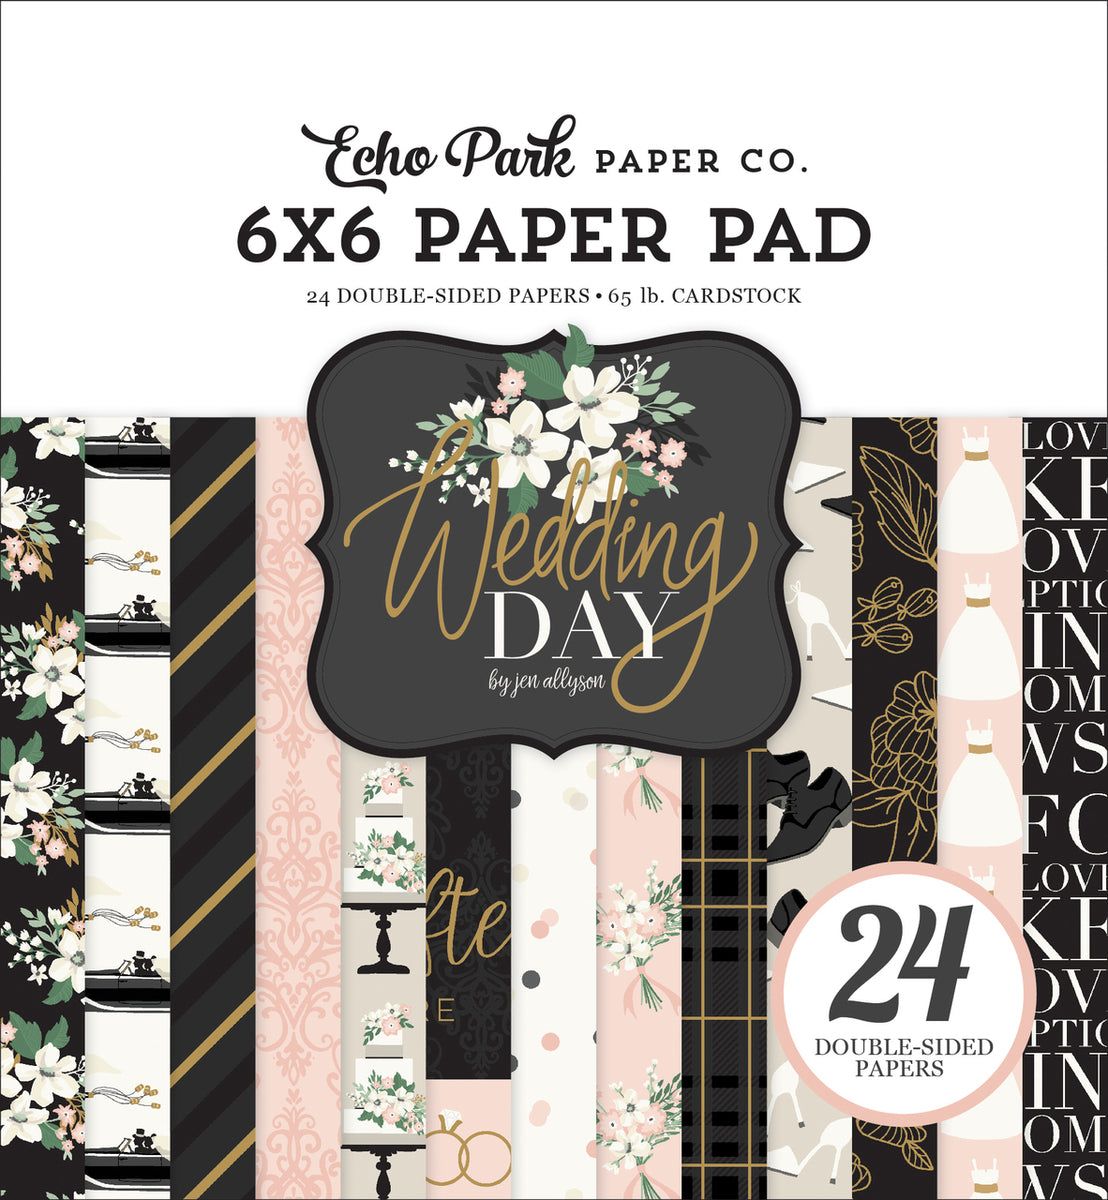 WEDDING DAY 6x6 cardstock pad with 24 double-sided pages from Echo Park Paper Co.